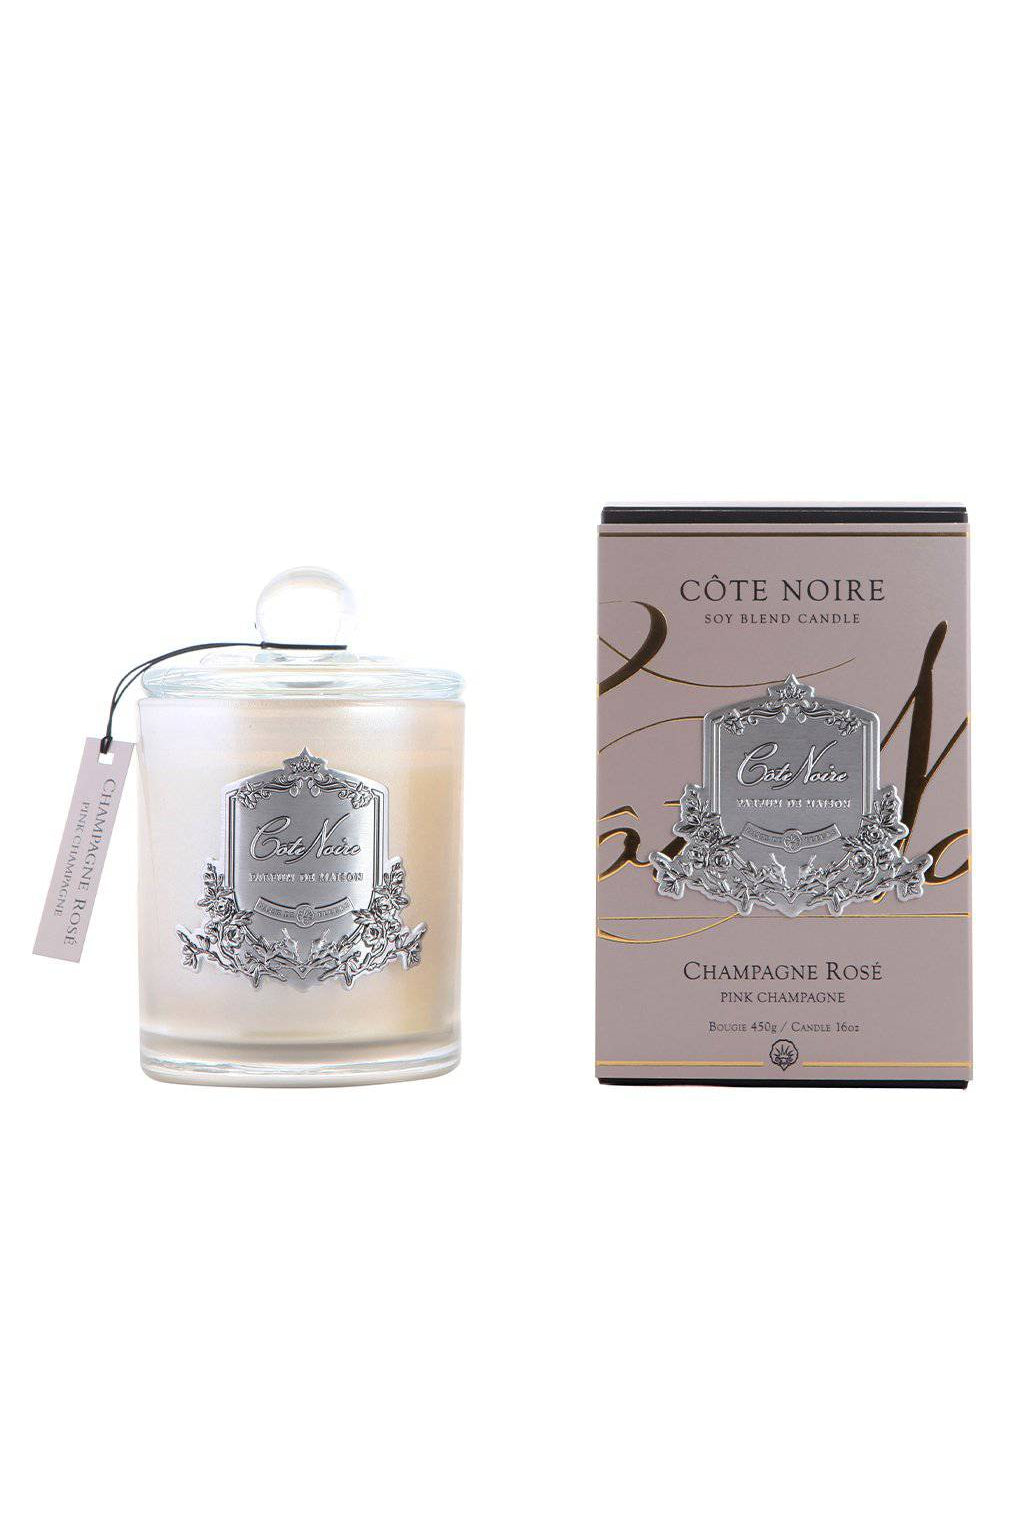 COTE NOIRE Pink Champagne Candle - Silver 450g - Magpie Style